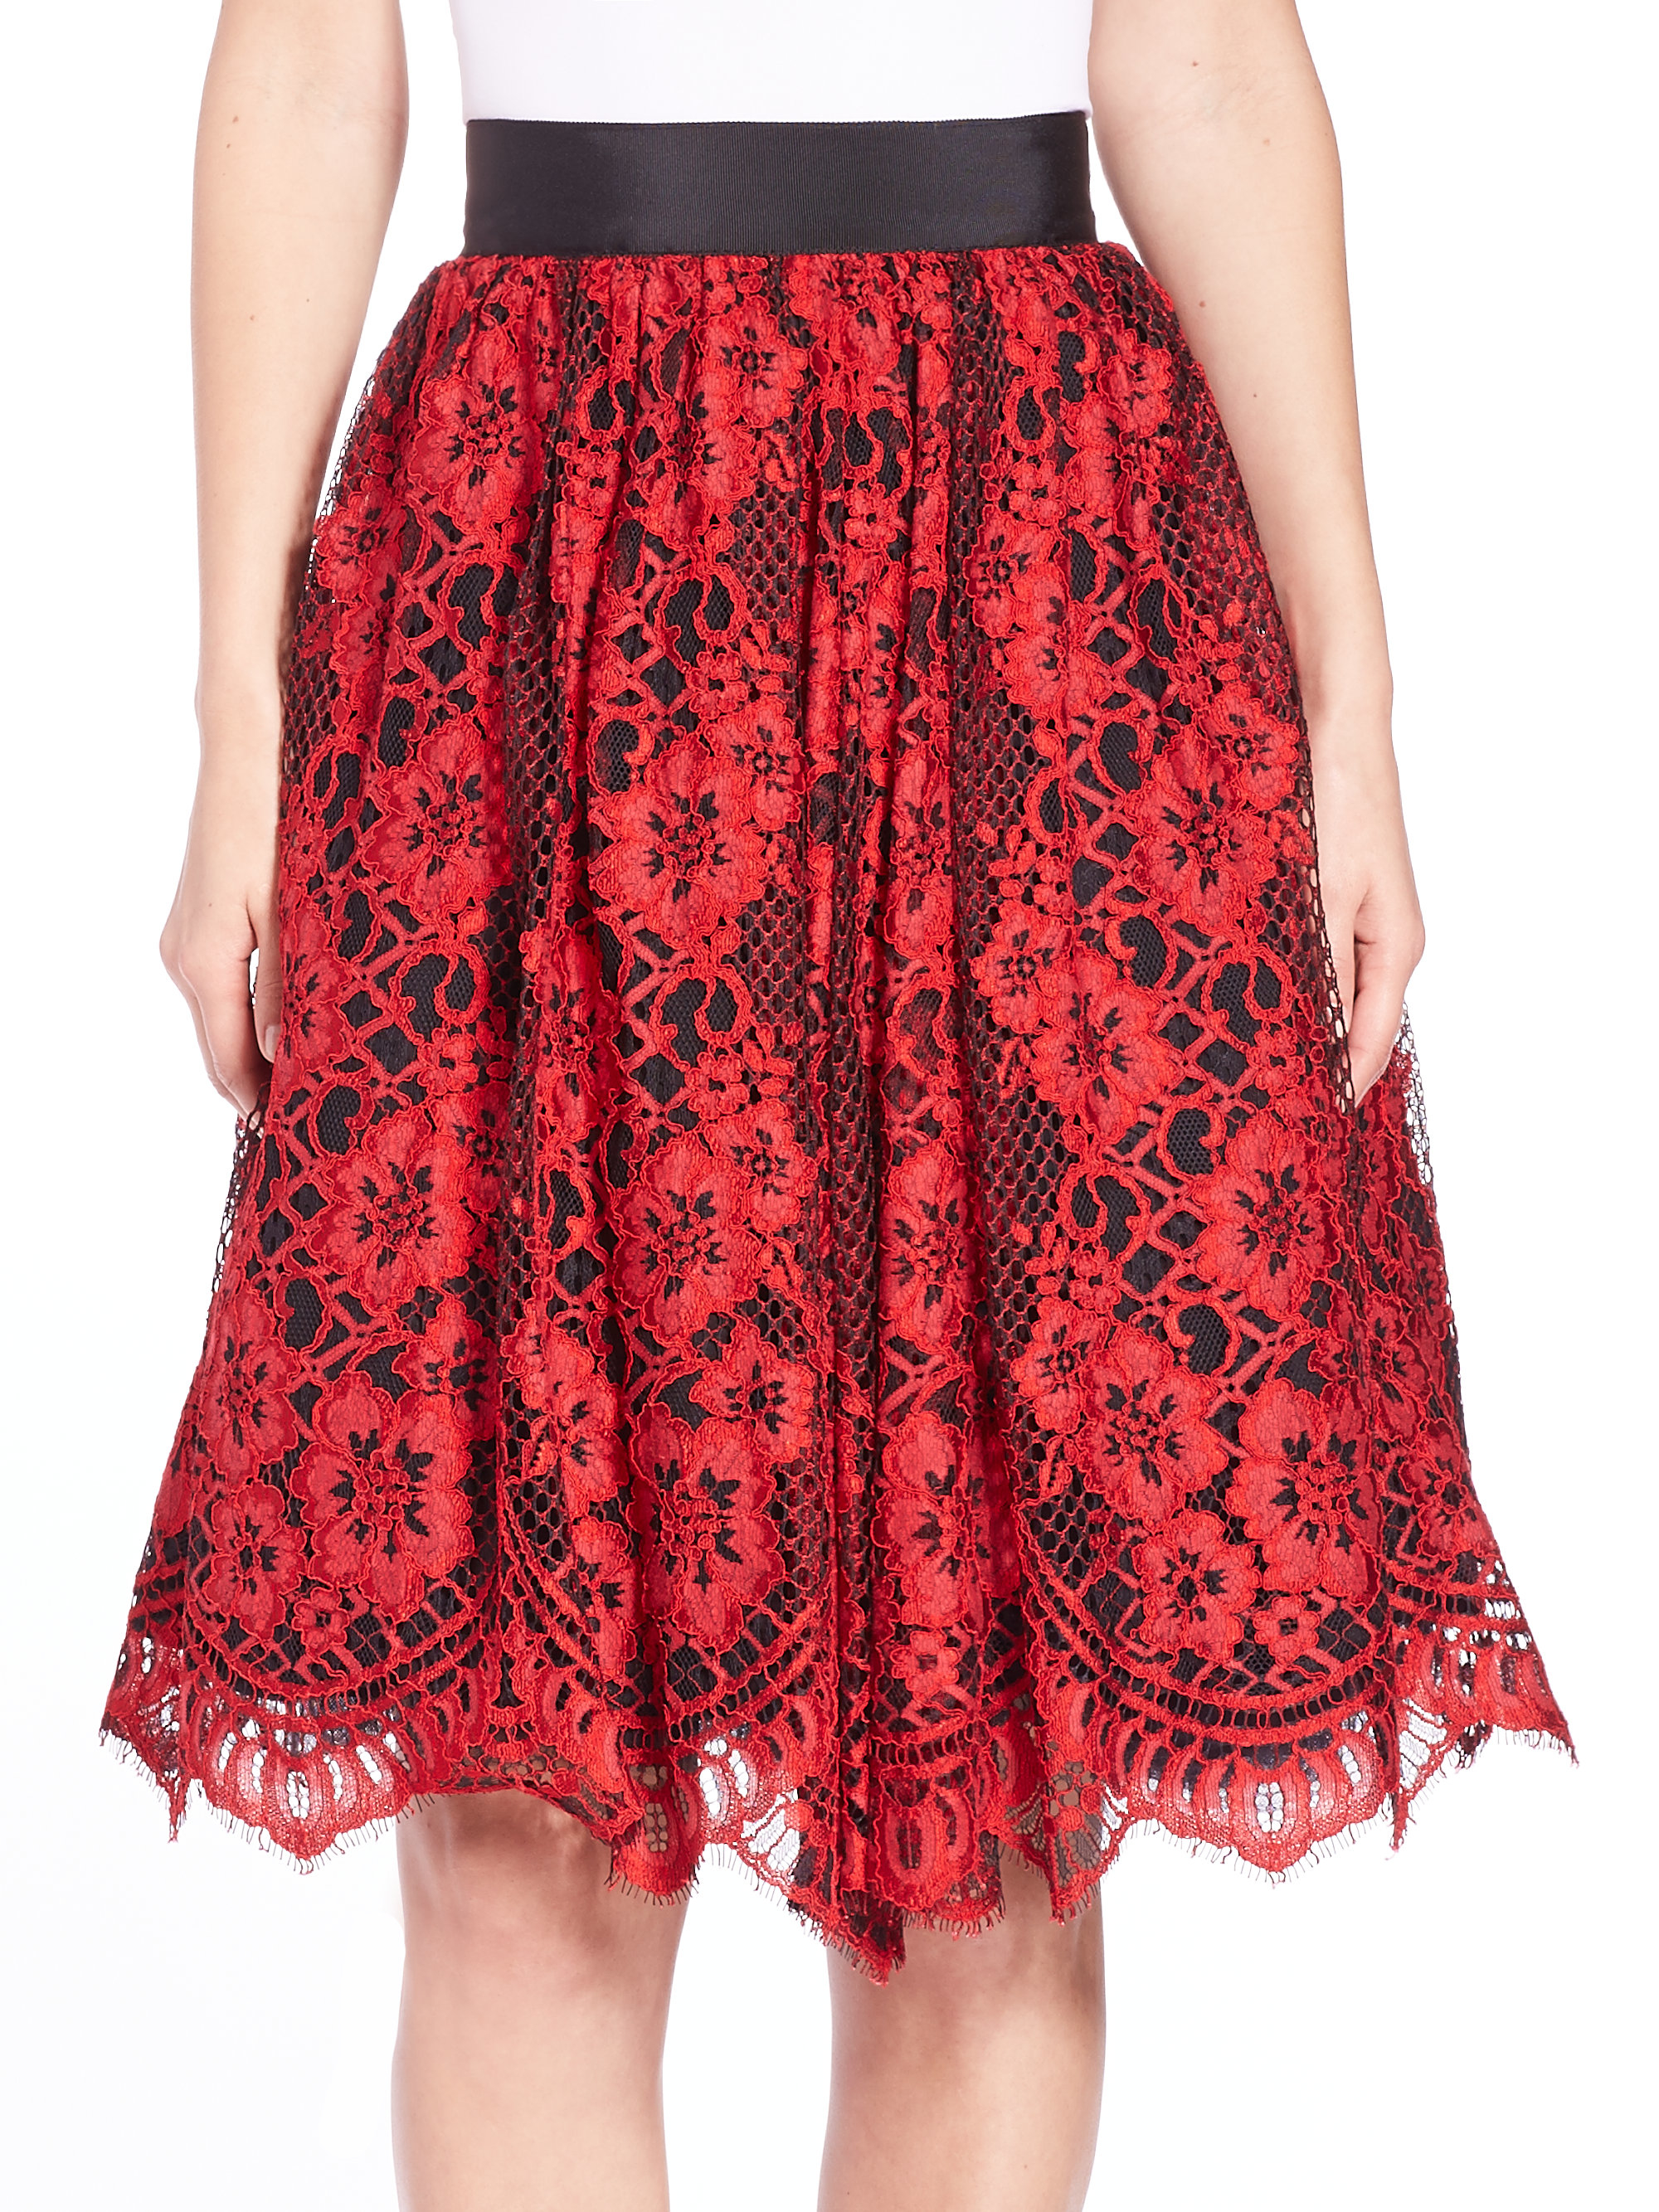 Lyst - Alexis Lorelei Lace Skirt in Red